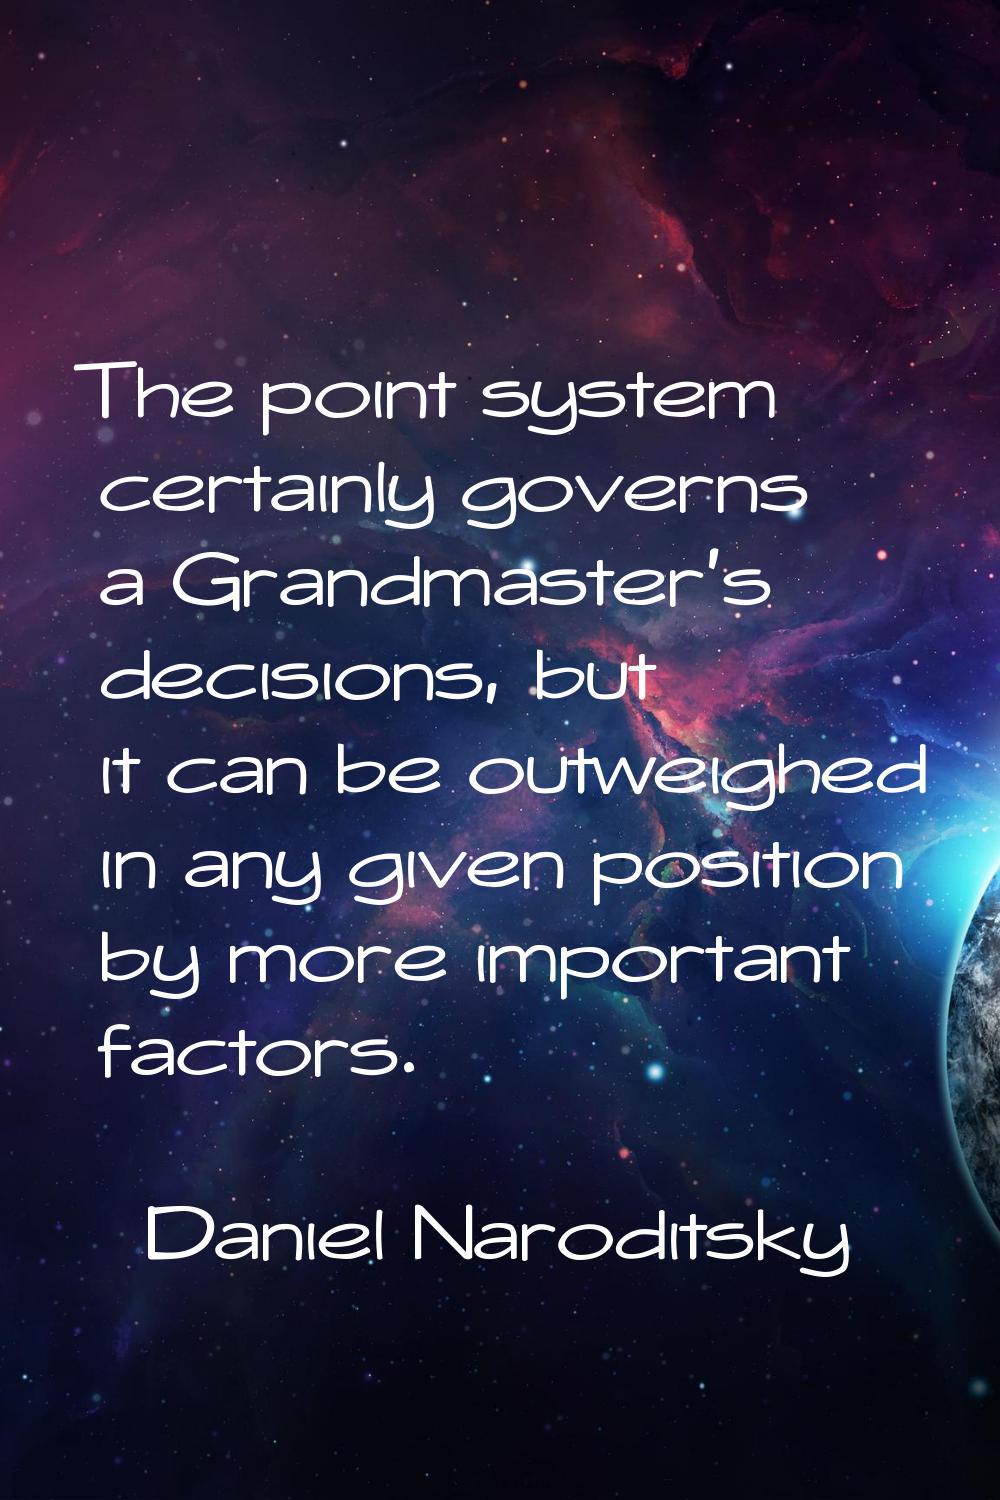 The point system certainly governs a Grandmaster's decisions, but it can be outweighed in any given